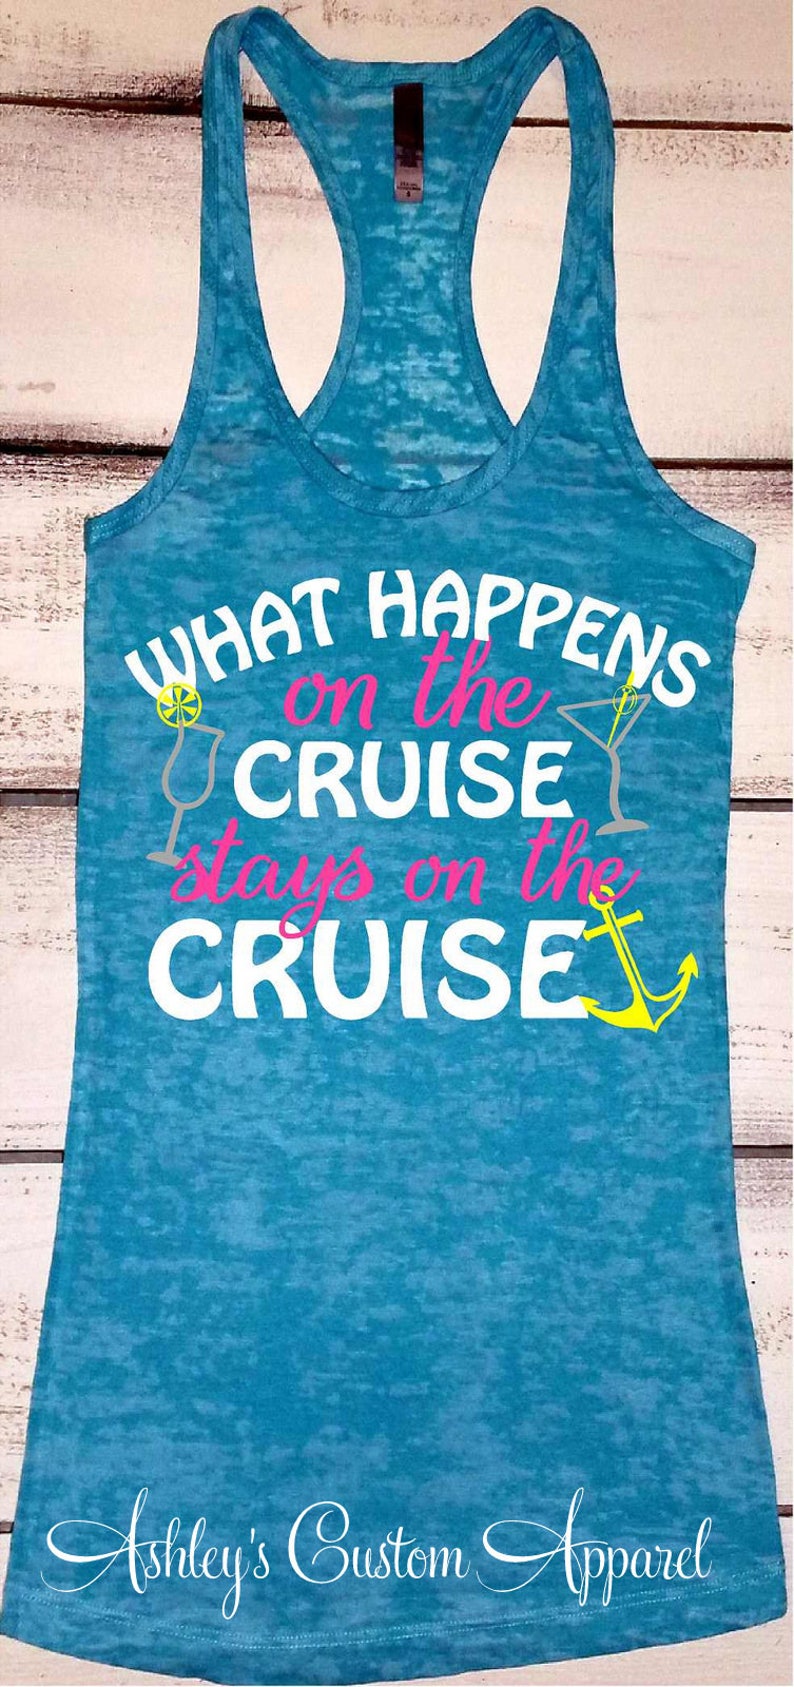 Cruise Shirts Funny Cruise Drinking Shirt What Happens On The | Etsy